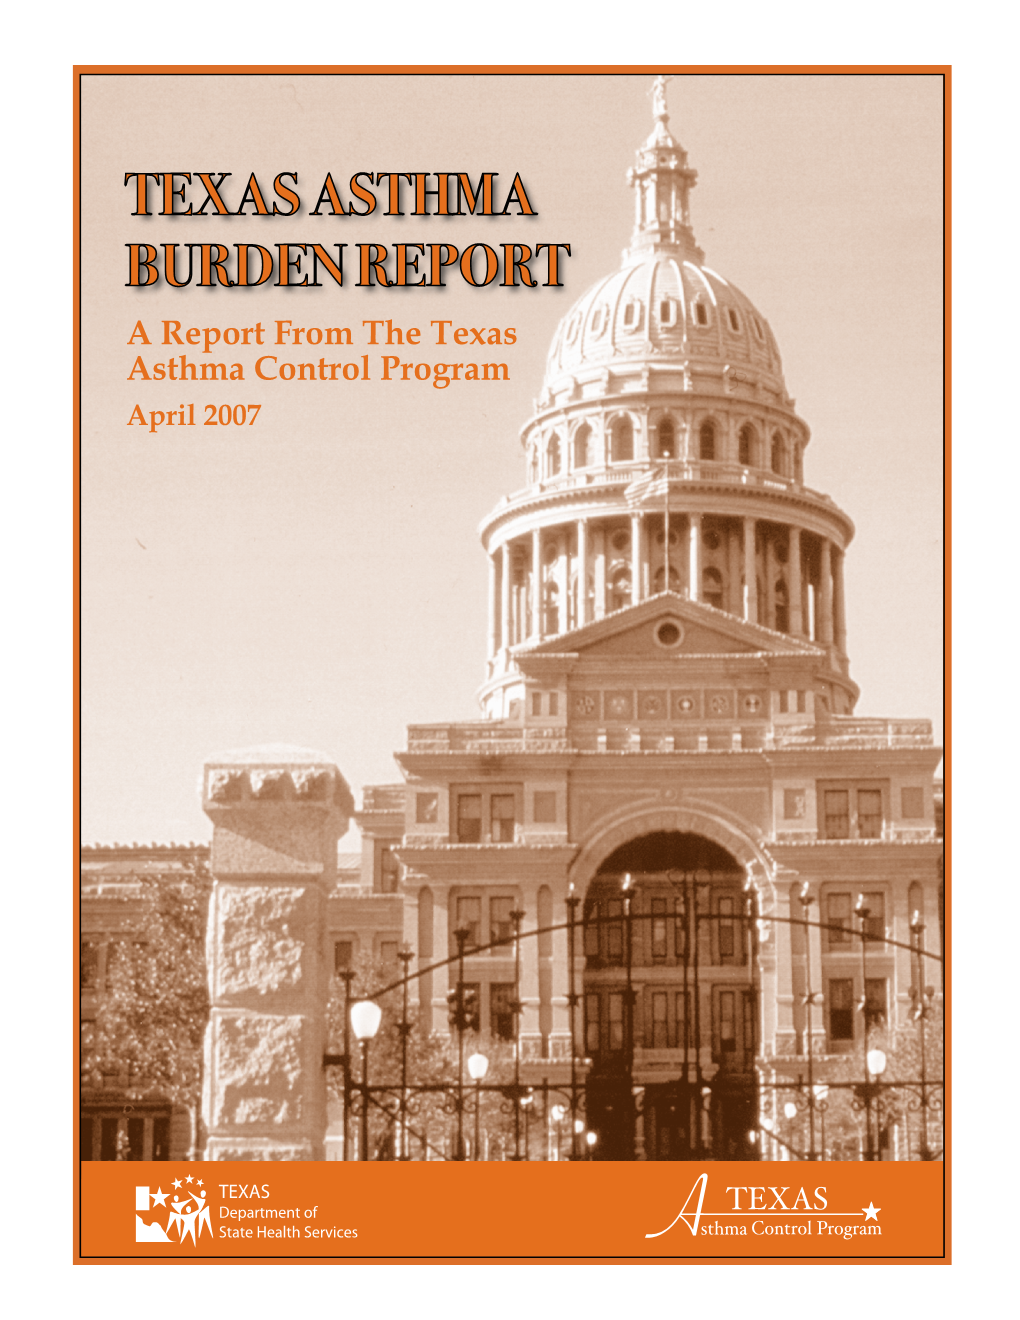 A Report from the Texas Asthma Control Program, April 2007